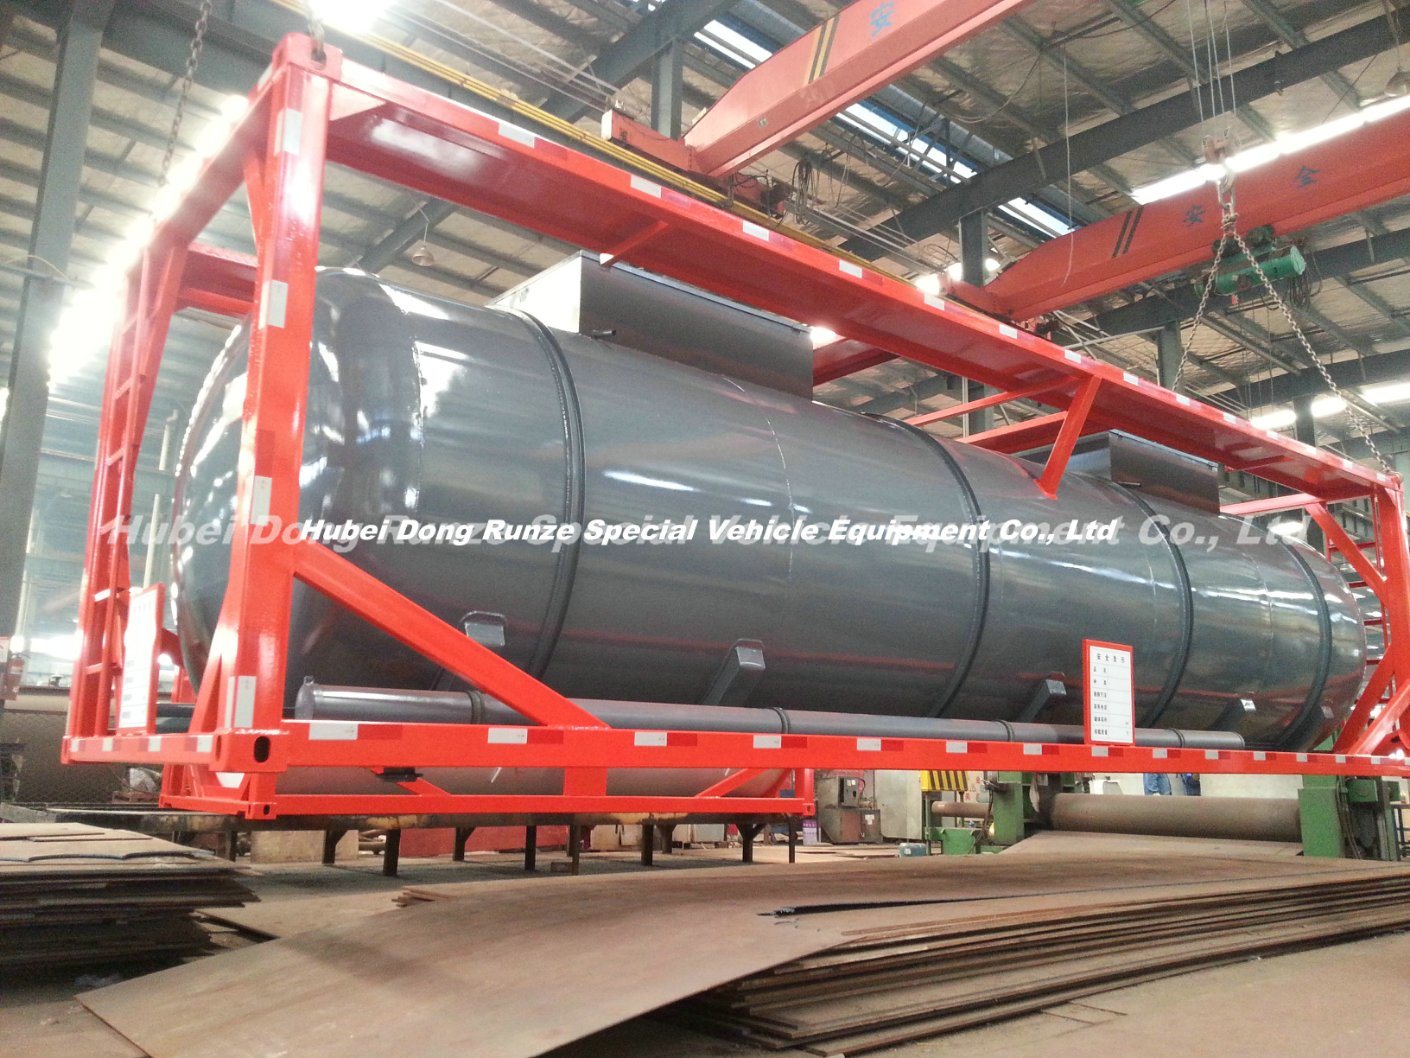 Sulfuric Acid Tank 20FT. 30FT LDPE Lined 16mm-20mm Perfect for Transport Dilute Sulphuric Acid 60% and Sulfuric Acid 98%, Hydrochloride, Hydrochloric Acid, Hf